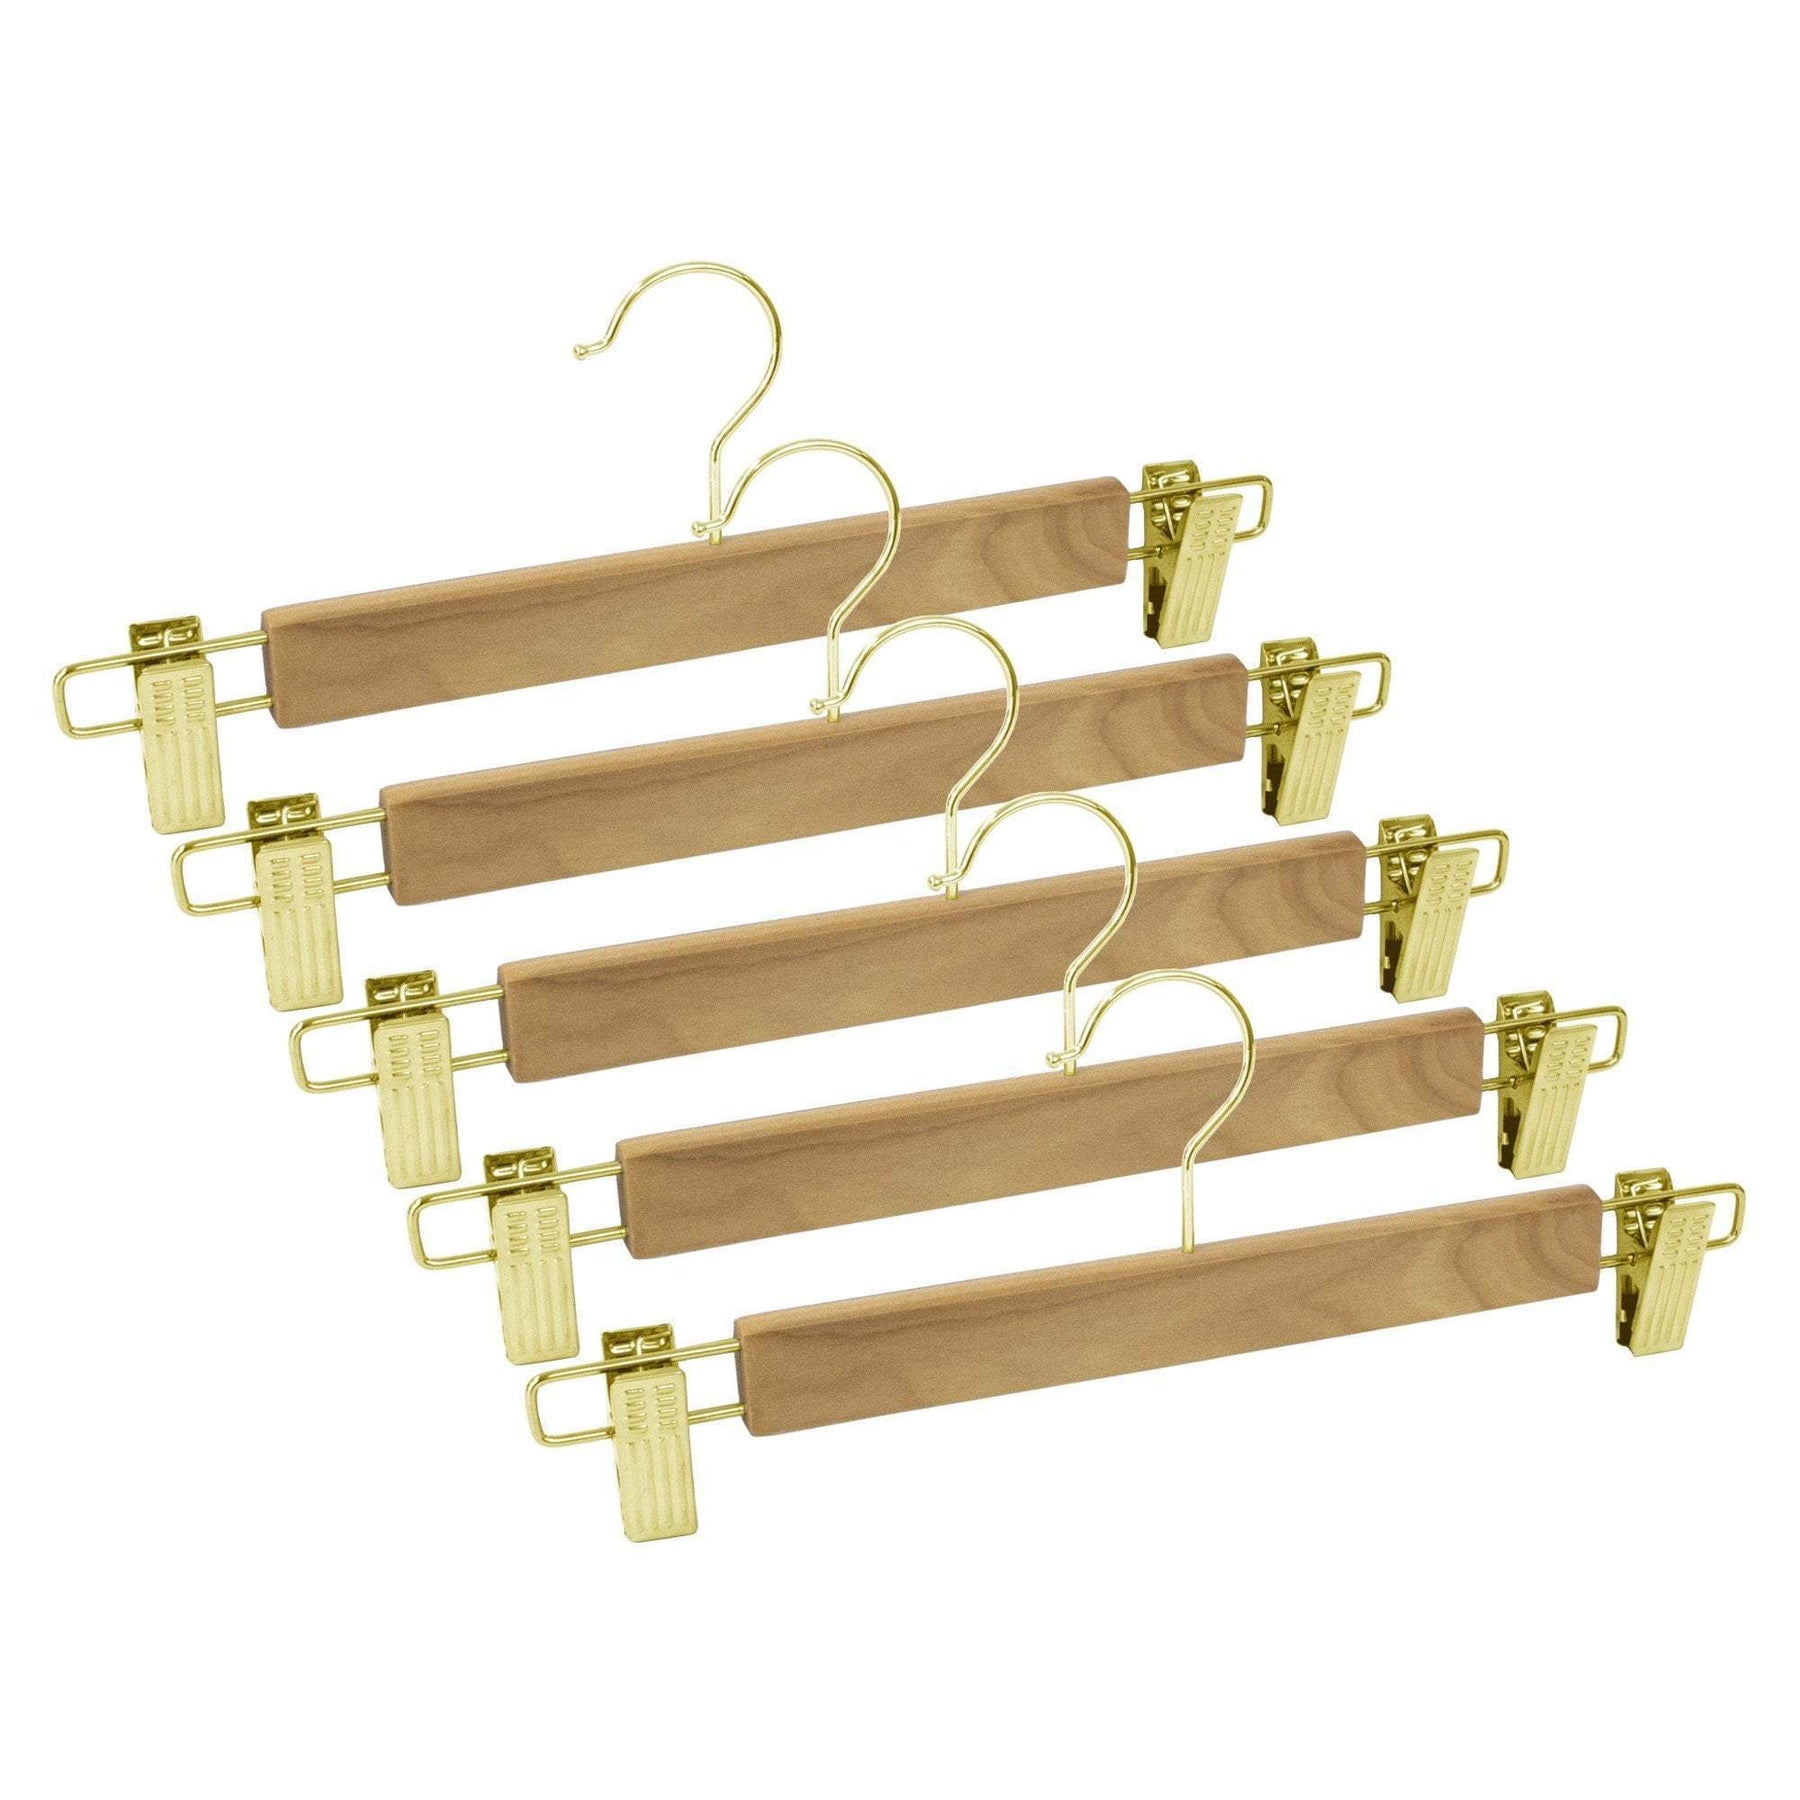 The Great American Hanger Company White Wood Top Hanger, Box of 8 Space Saving 17 inch Flat Wooden Hangers w/ Chrome Swivel Hook & Notches for Shirt